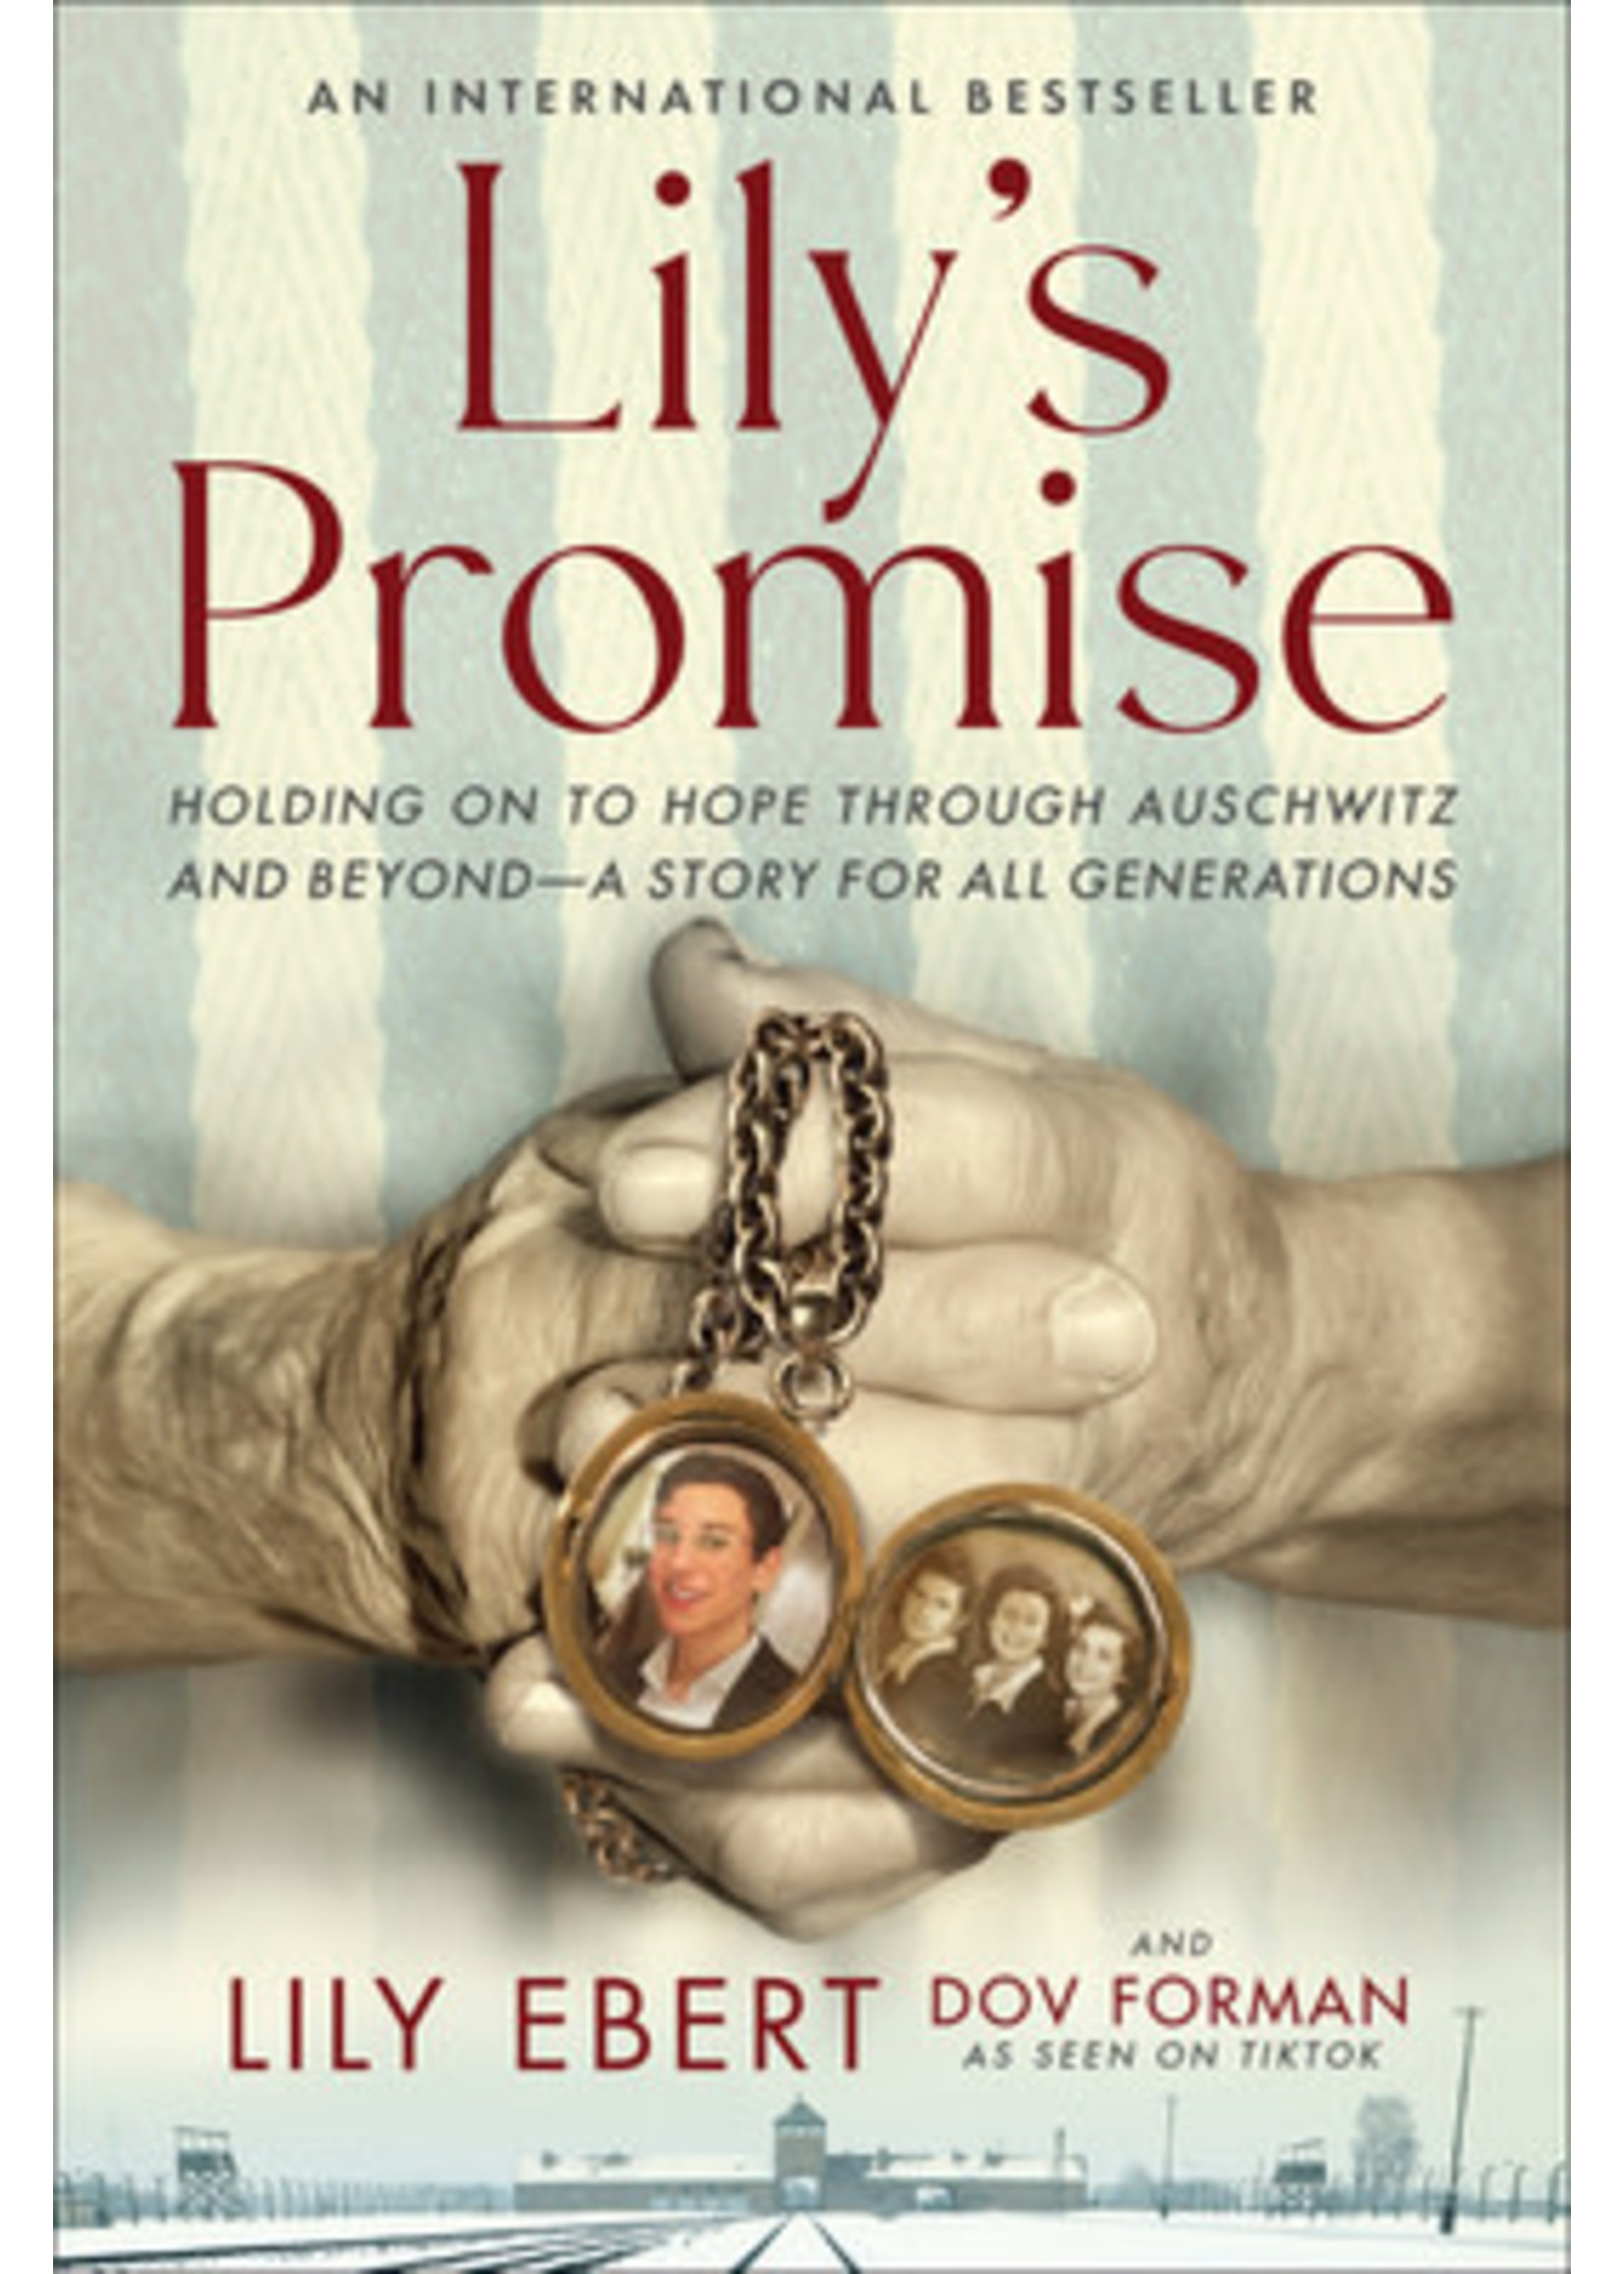 Lily's Promise: Holding on to Hope Through Auschwitz and Beyond--A Story for All Generations by Lily Ebert, Dov Forman